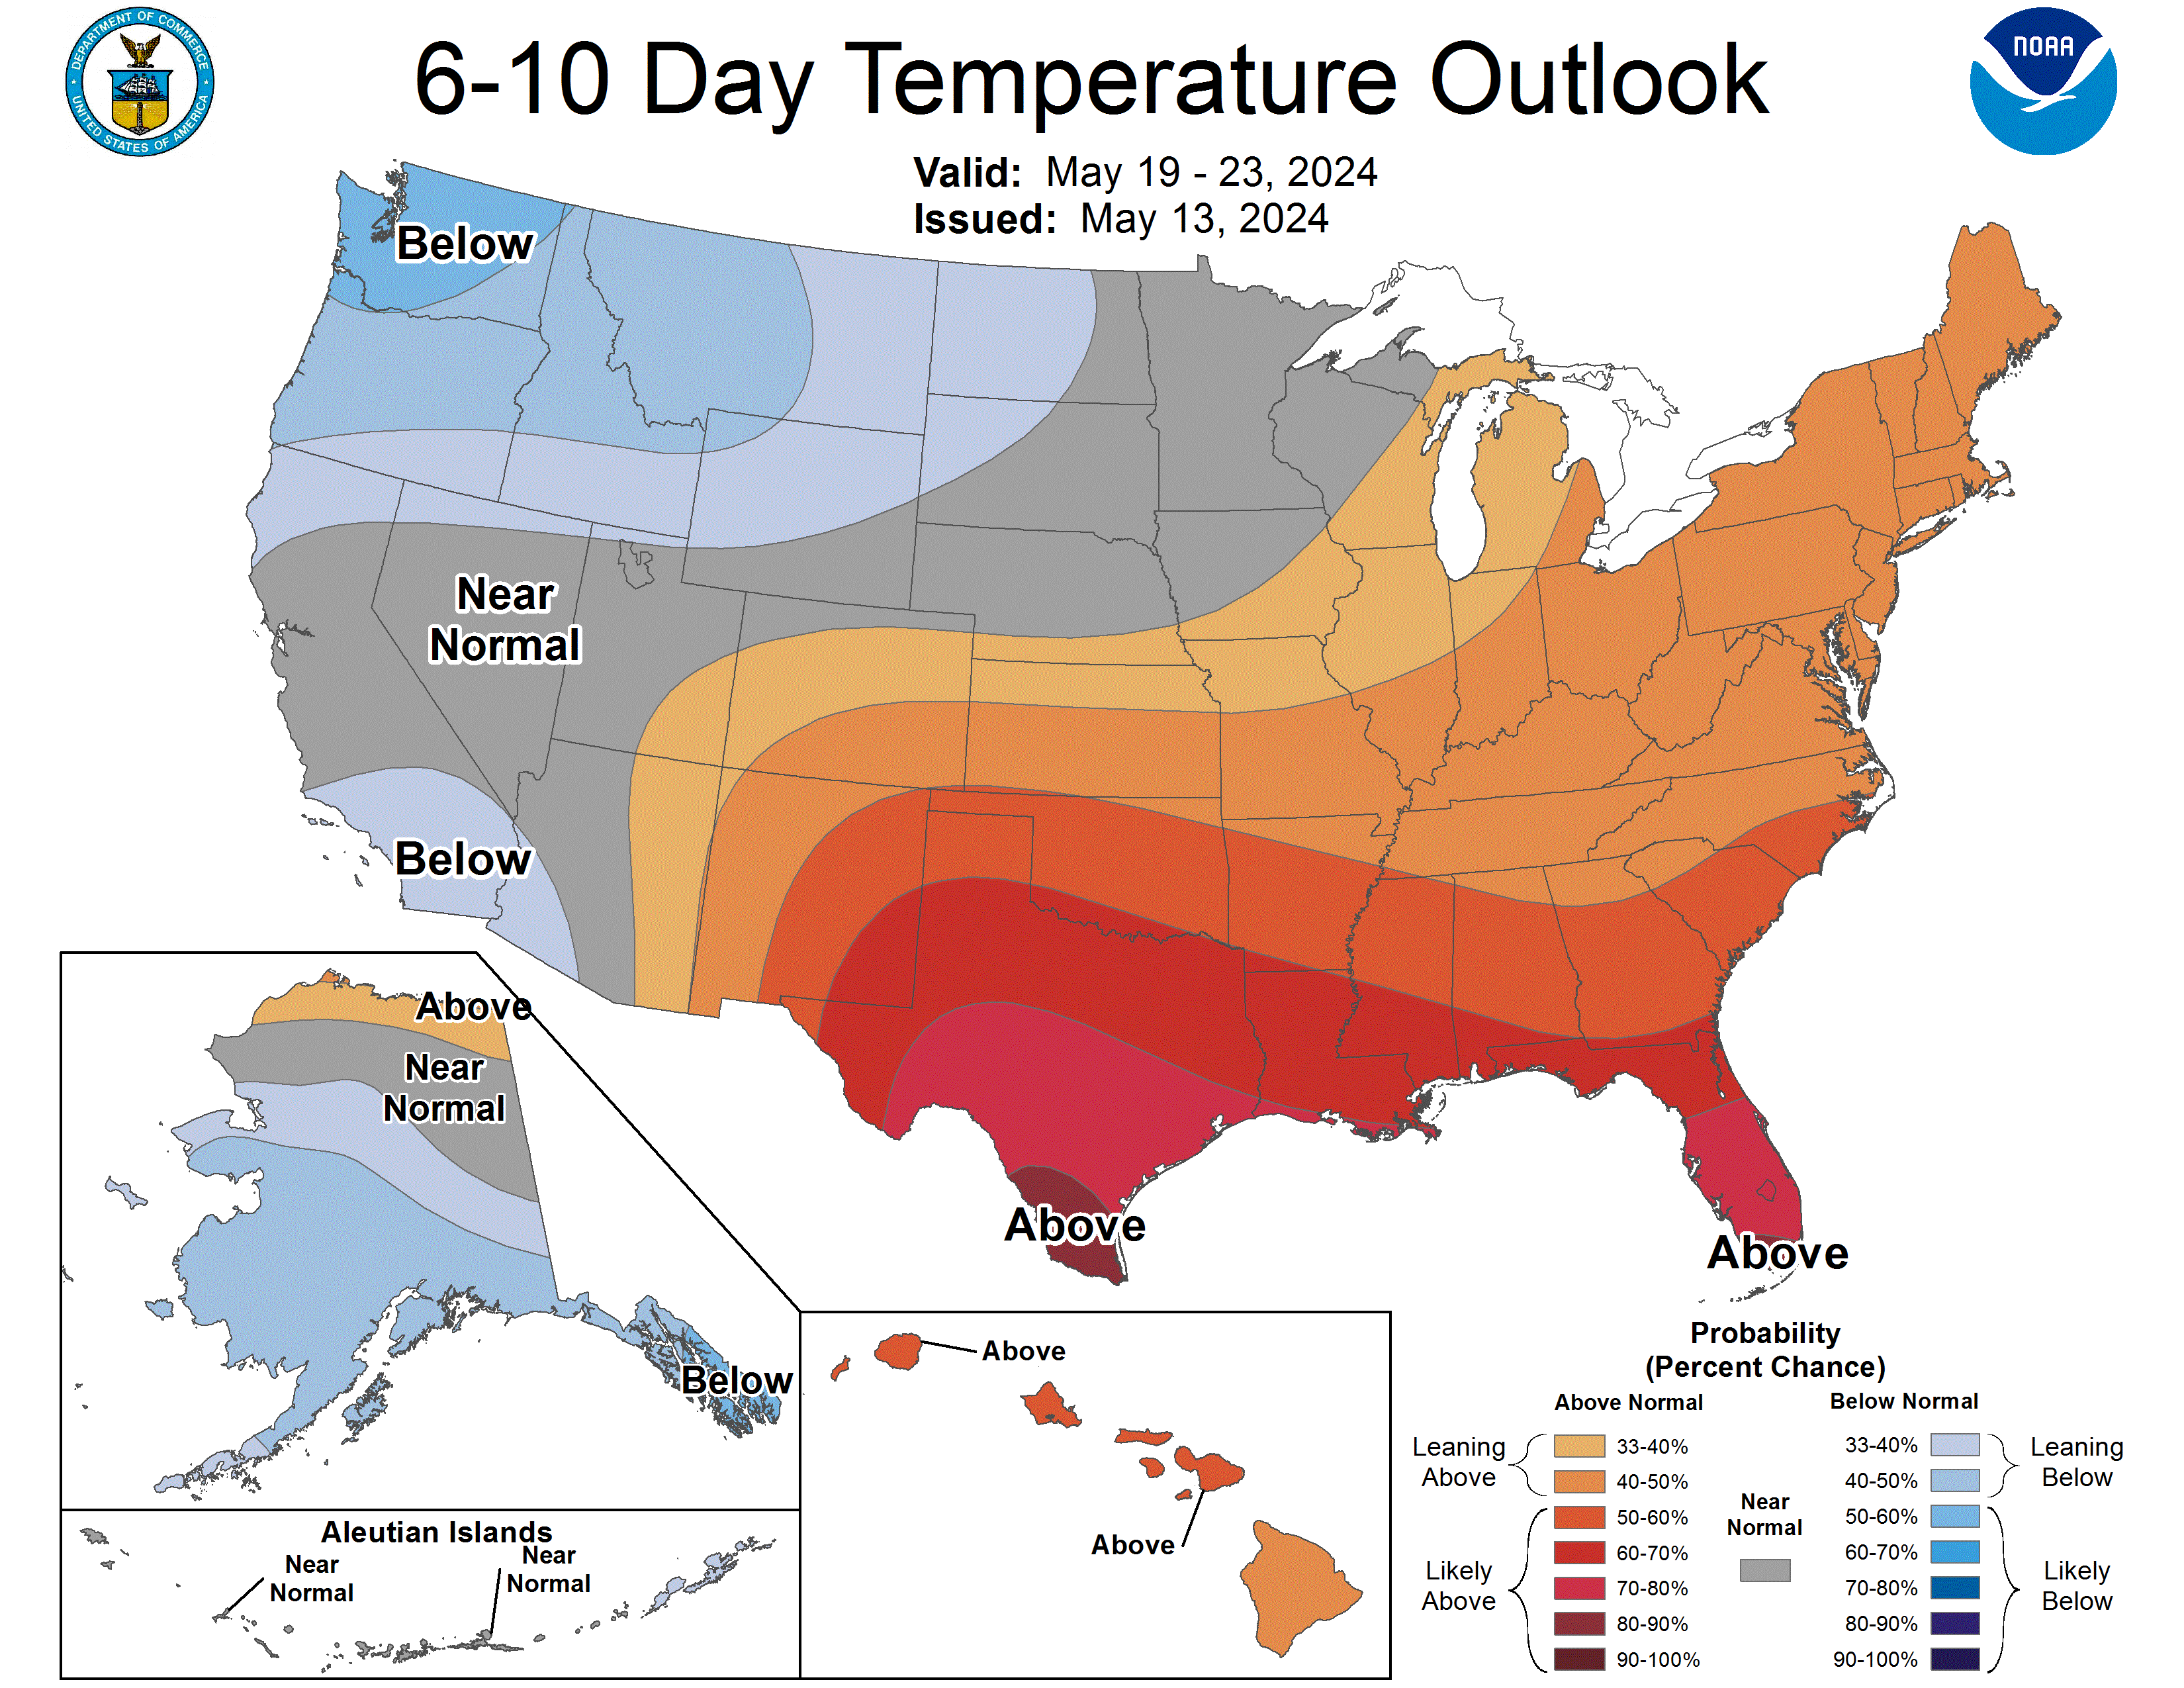 NWS 6-10 Day Outlook